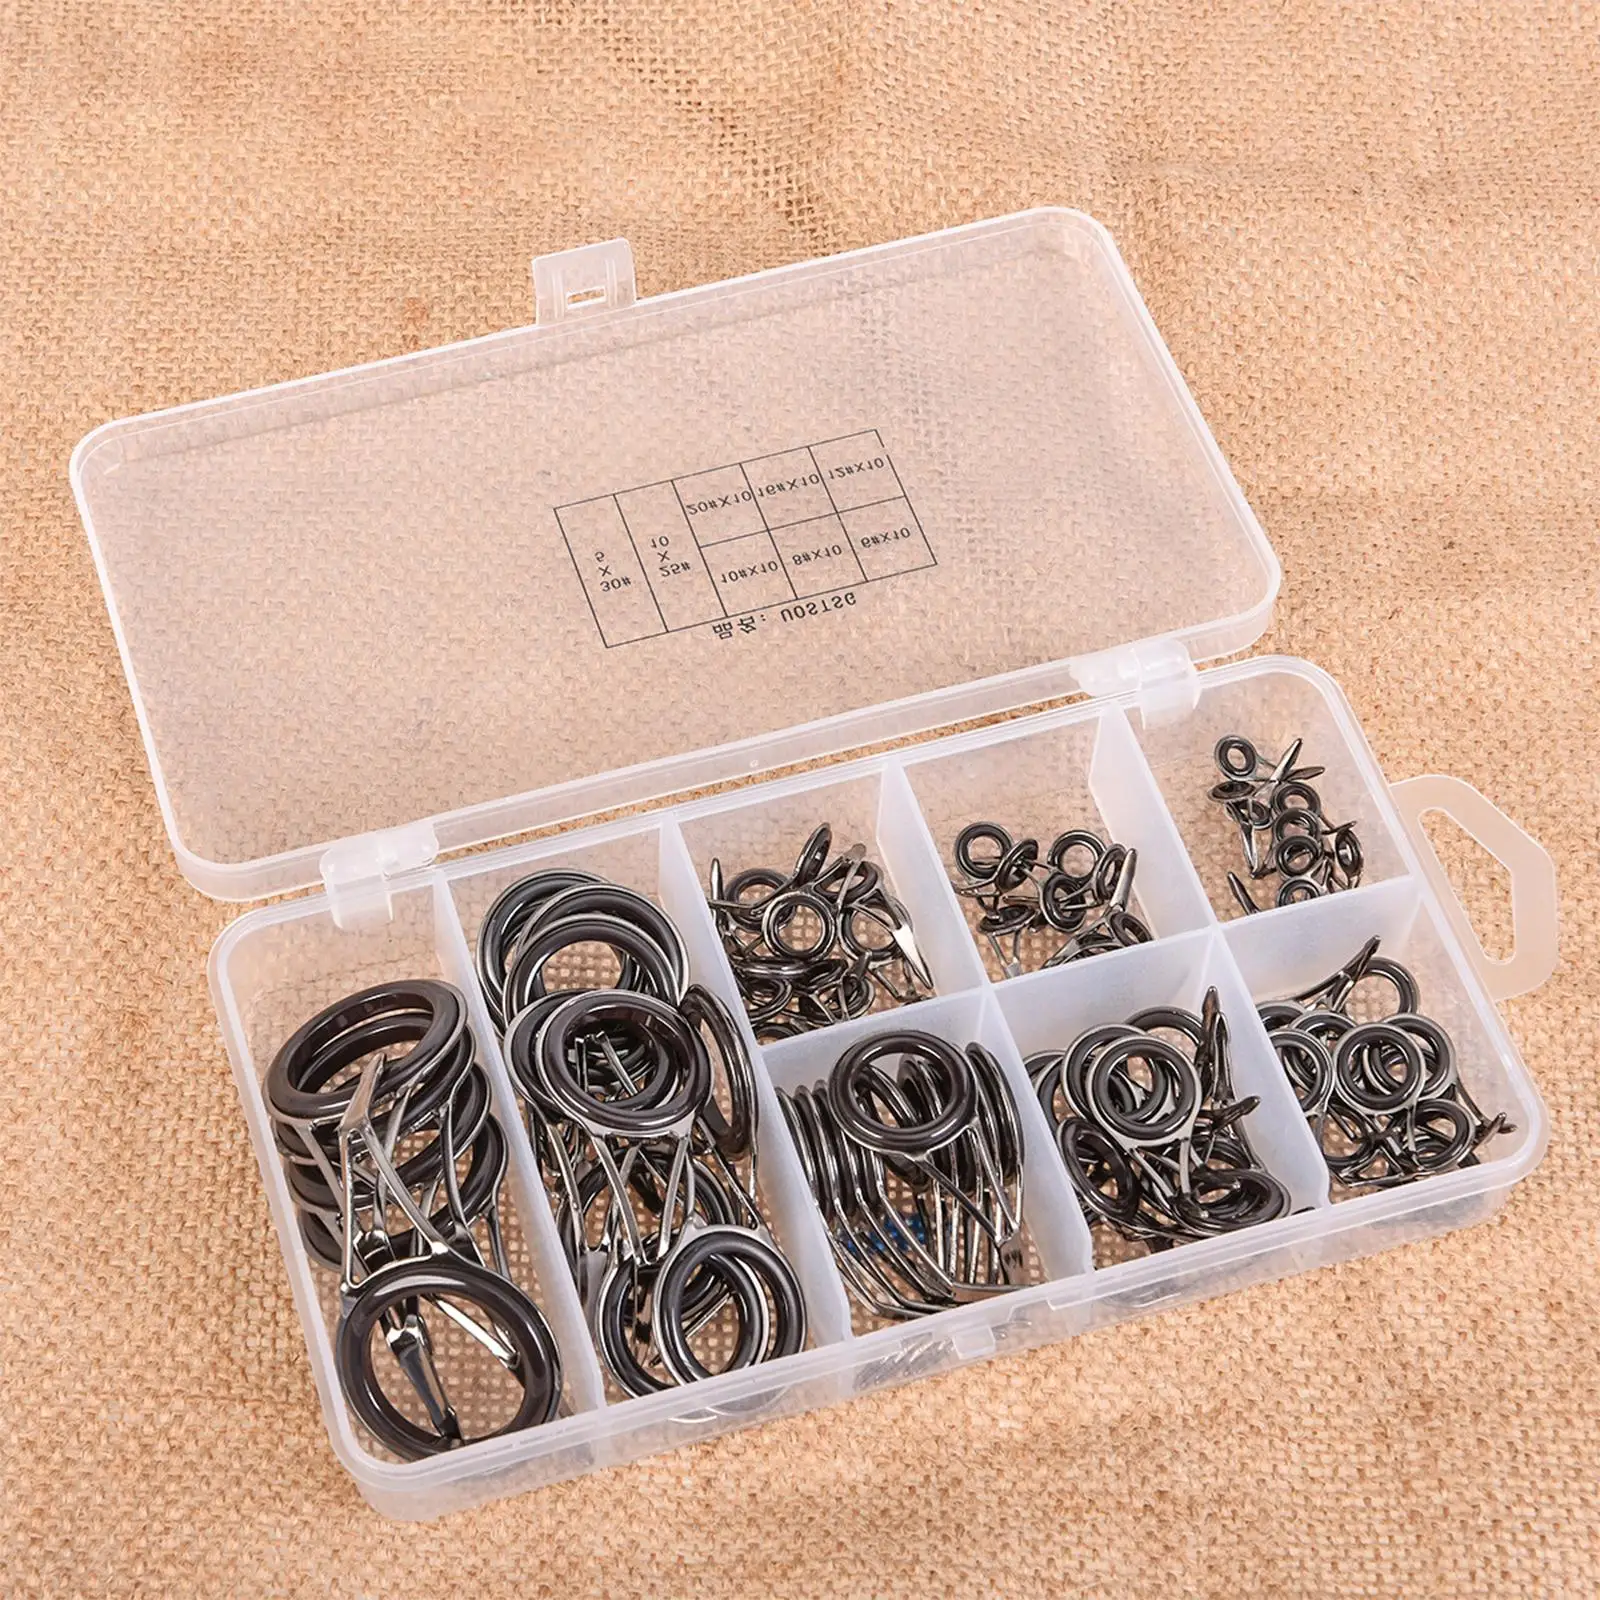 75 Pieces Fishing Rod Tip Guide Rings Kit Mixed Size in A Box Ceramic Rings